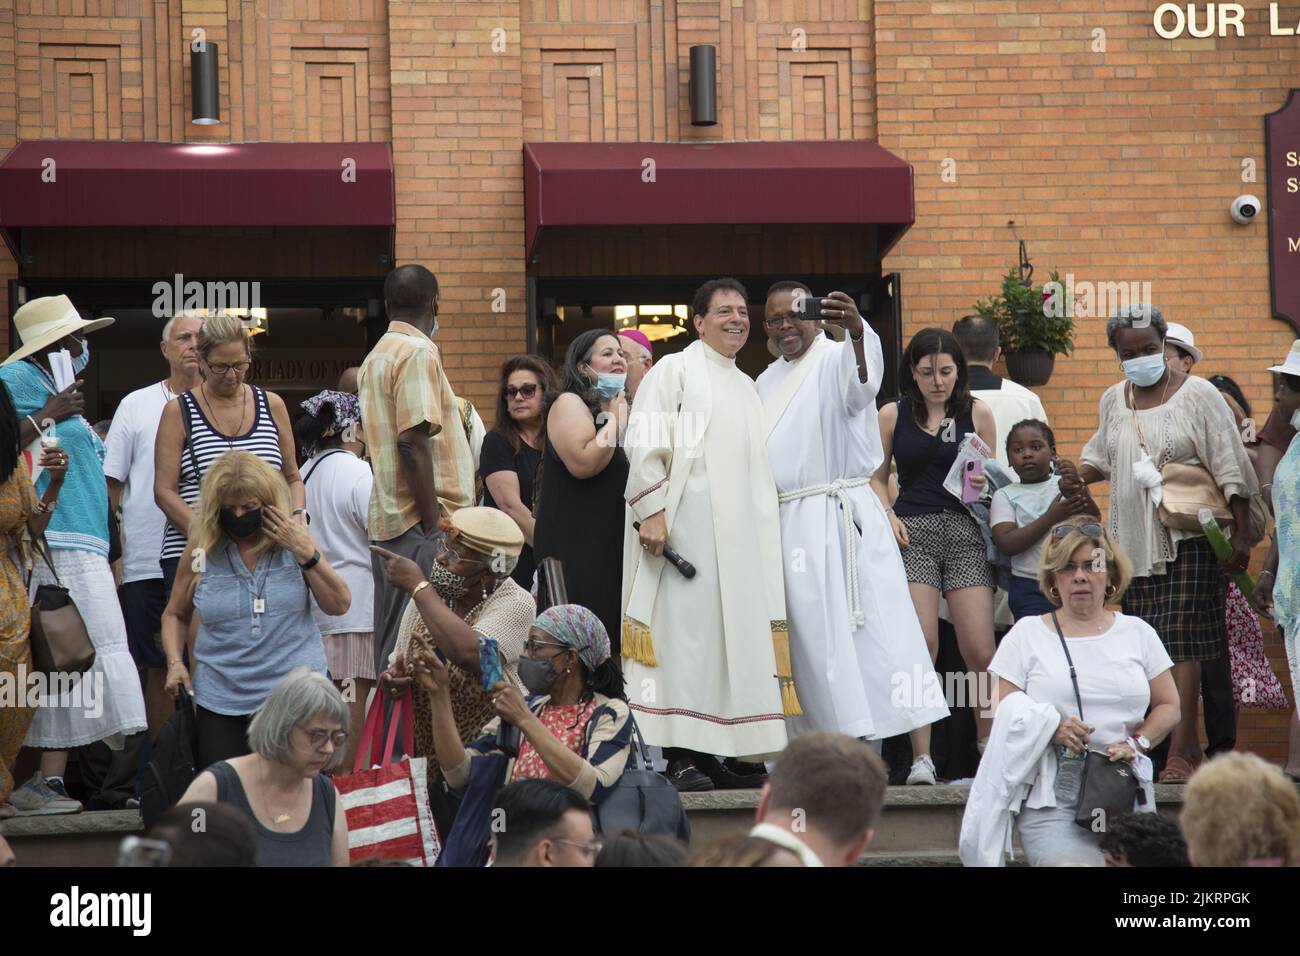 Priests lead a procession outside Our Lady of Mount Saint Carmel Church at the during the annual Giglio Feast in Williamsburg, Brooklyn, New York. Stock Photo